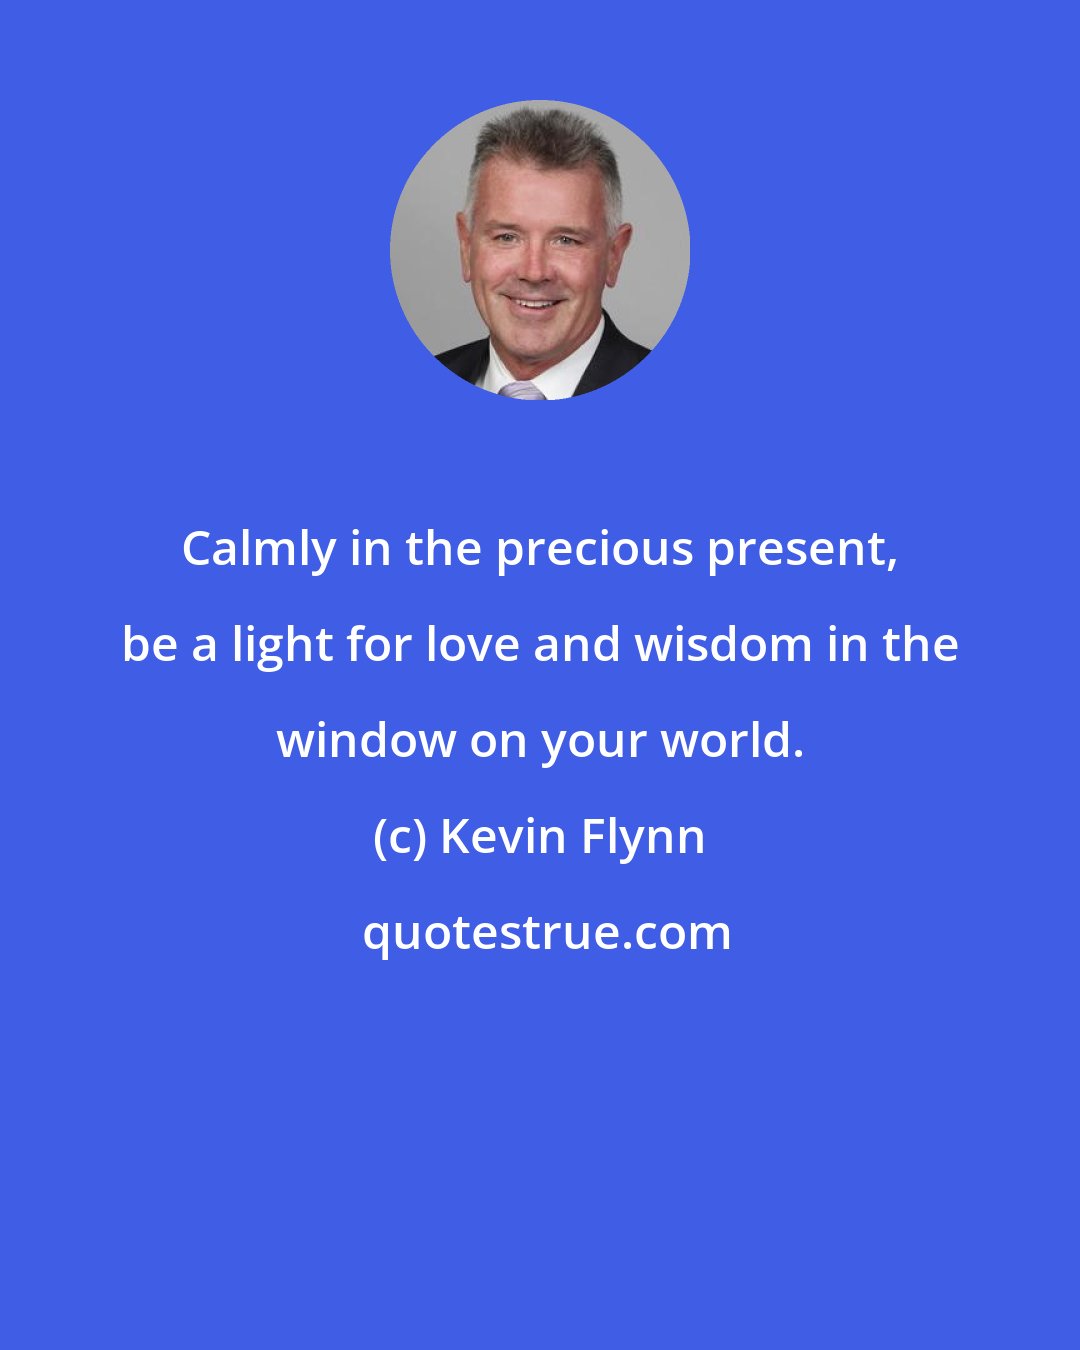 Kevin Flynn: Calmly in the precious present, be a light for love and wisdom in the window on your world.